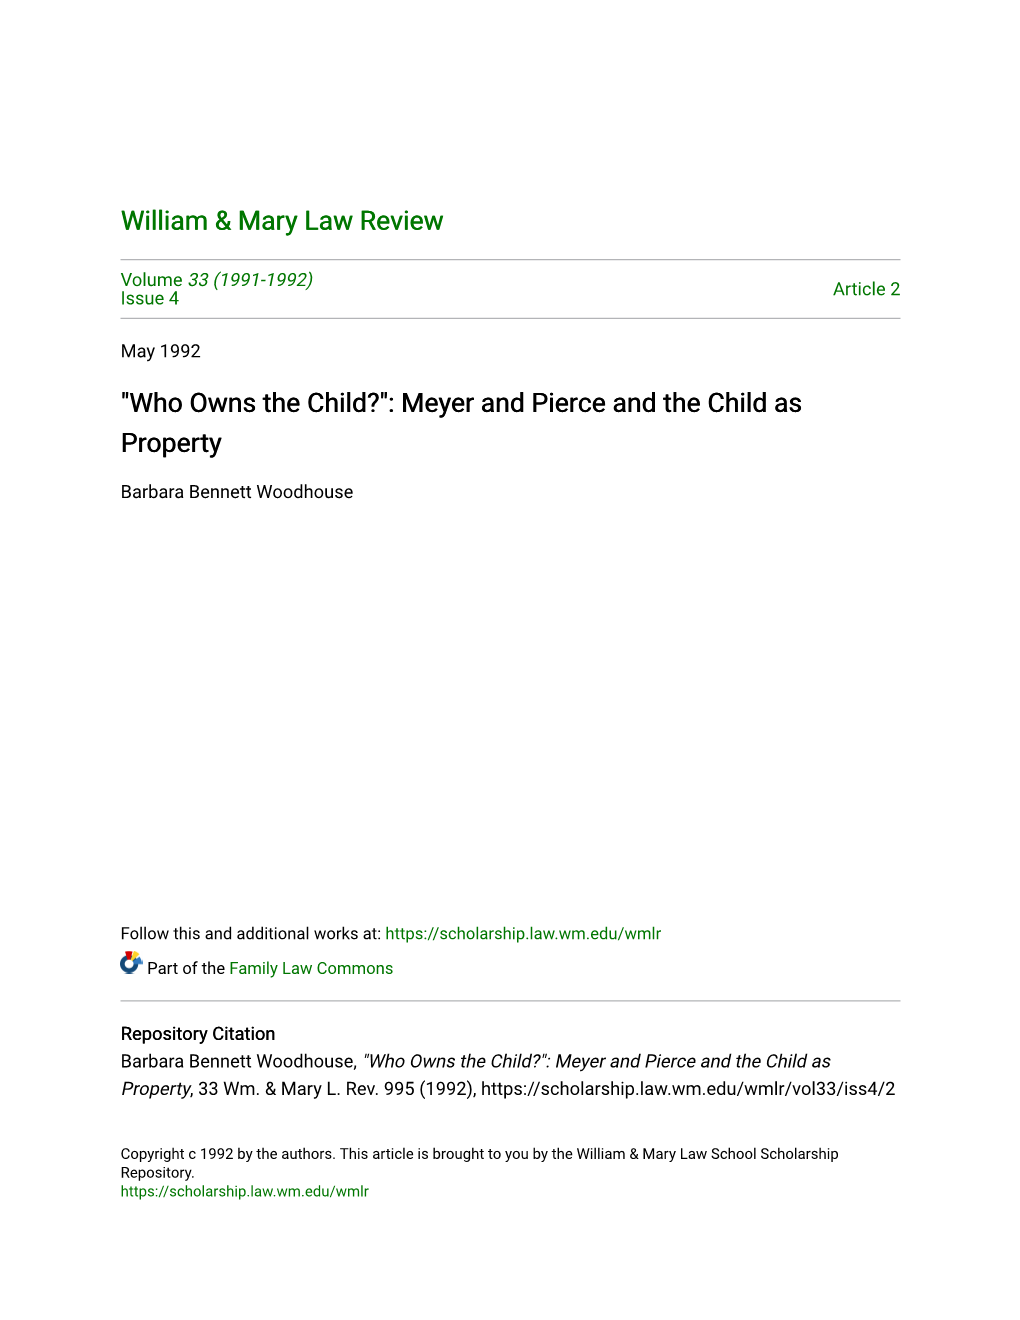 Meyer and Pierce and the Child As Property